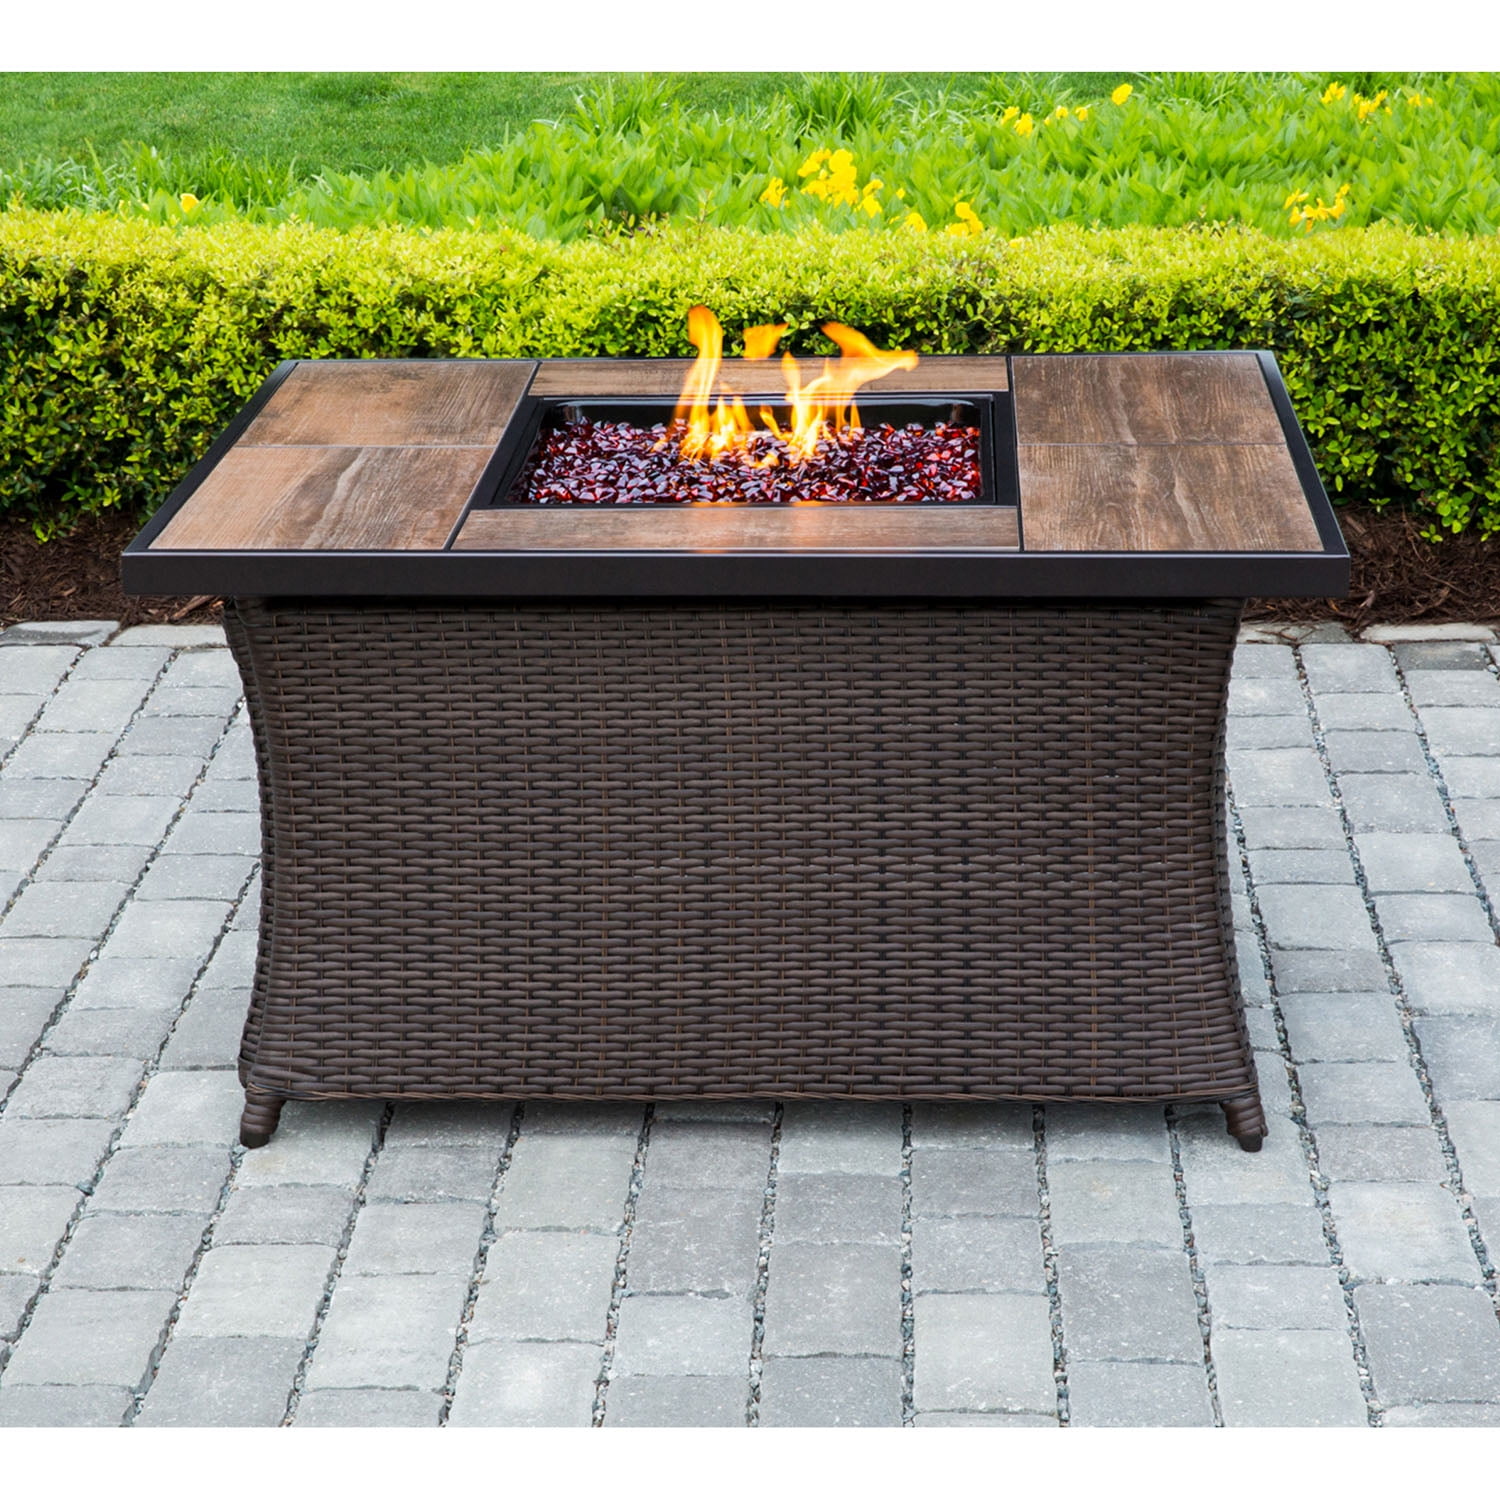 Btu Woven Fire Pit Coffee Table, Hanover Fire Pit Kit